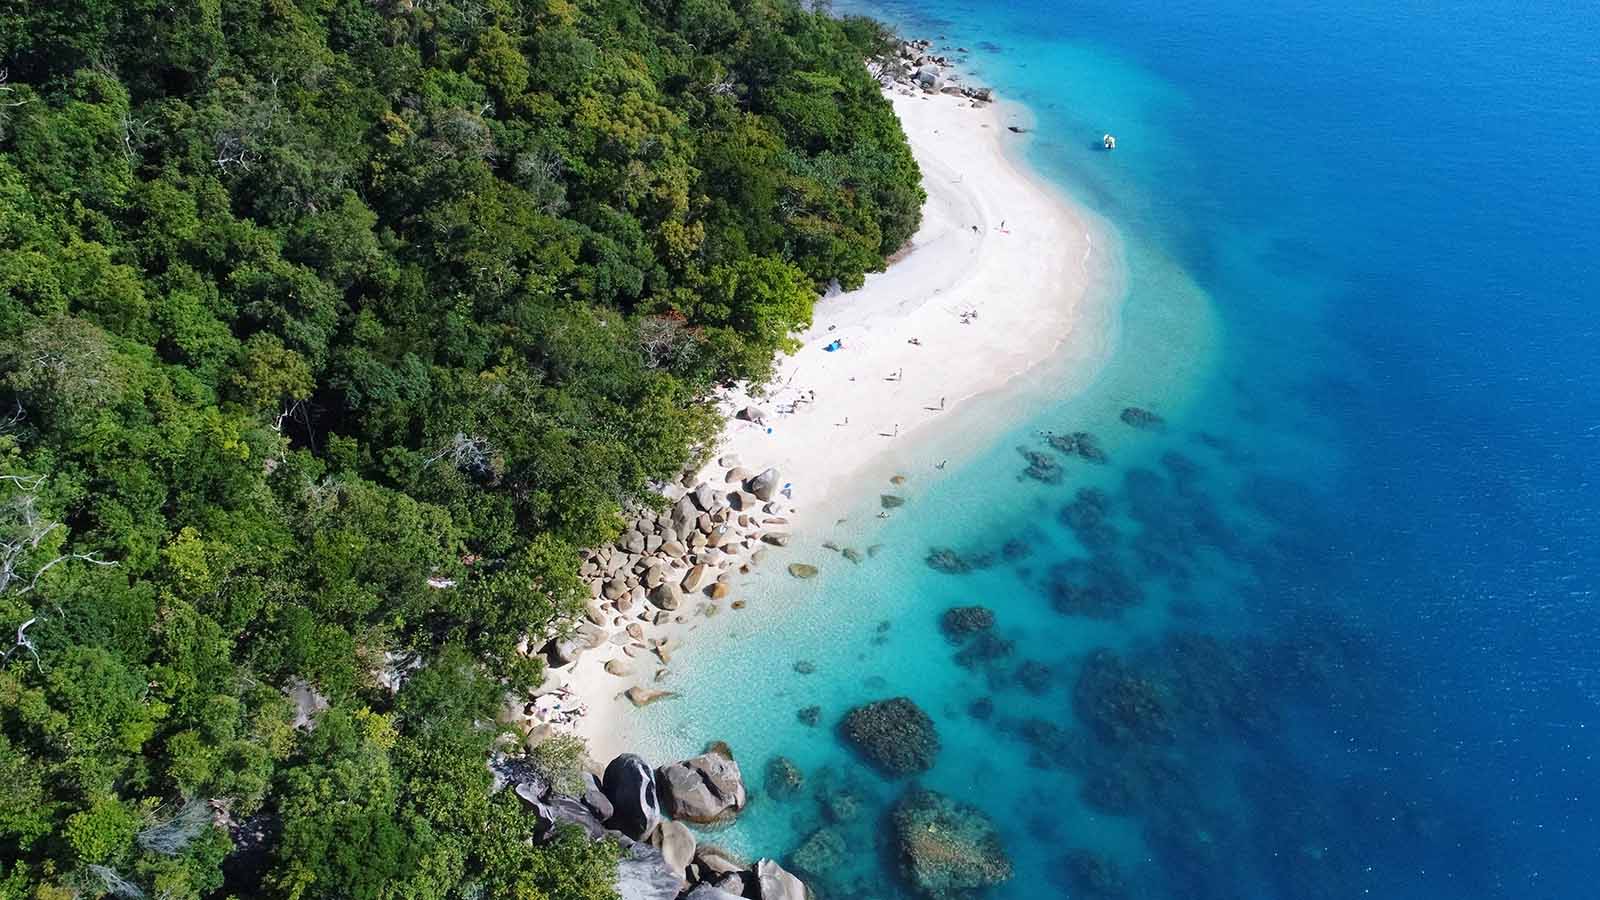 Nudey Beach, Fitzroy Island, Great Barrier Reef, Queensland | The trees helping to save the reef